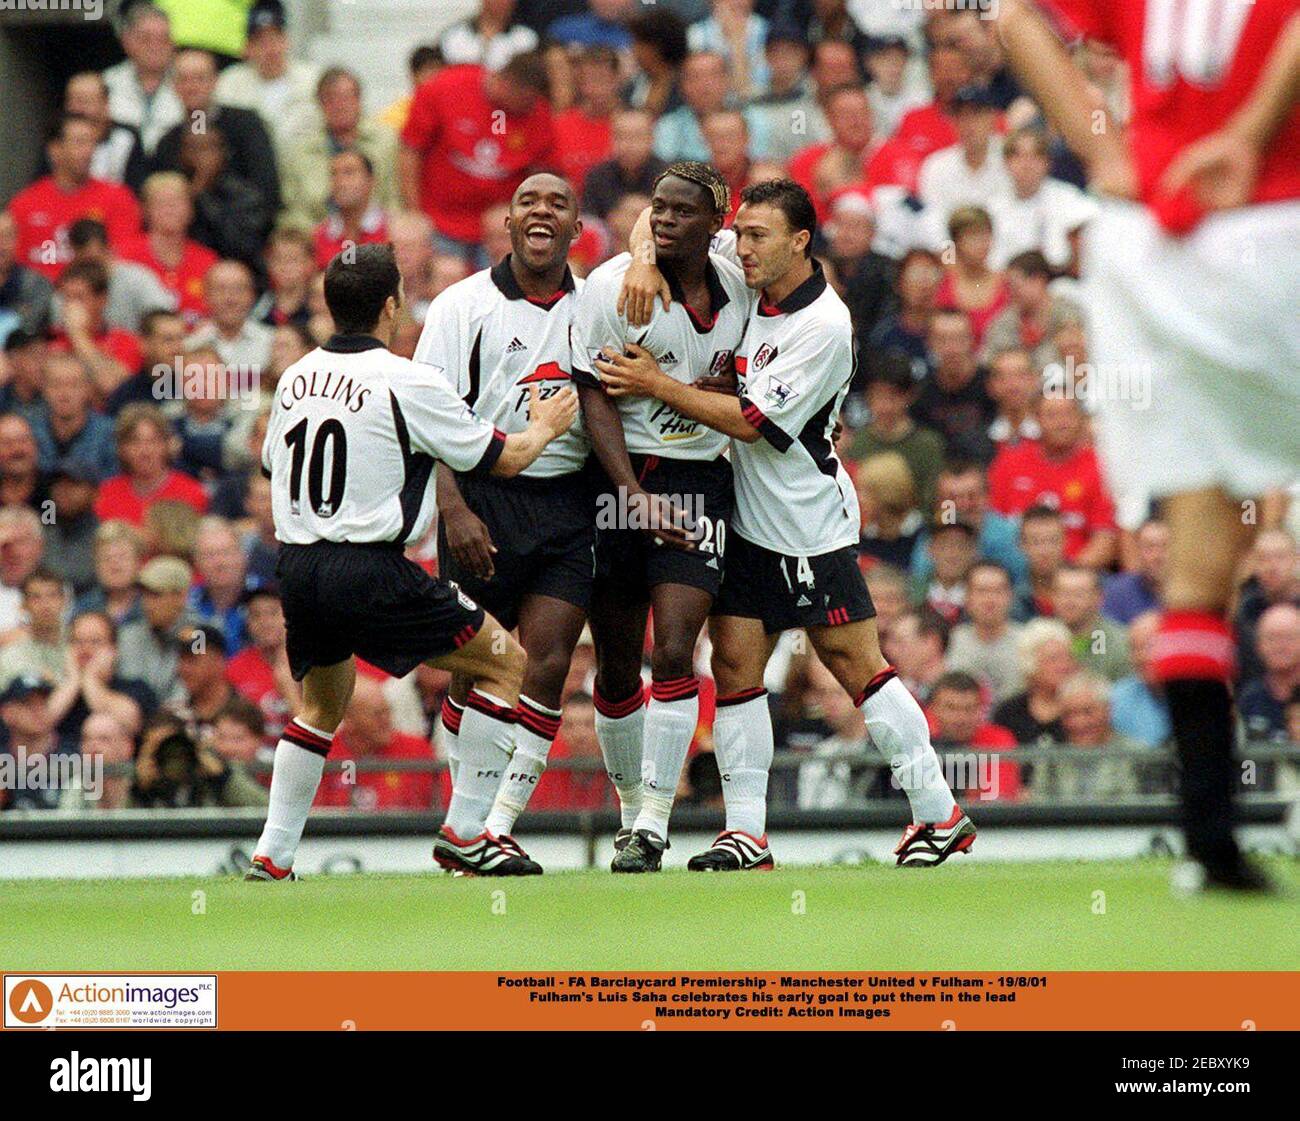 Football - FA Barclaycard Premiership - Manchester United v Fulham - 19/8/01  Fulham's Louis Saha celebrates his early goal to put them in the lead  Mandatory Credit: Action Images Stock Photo